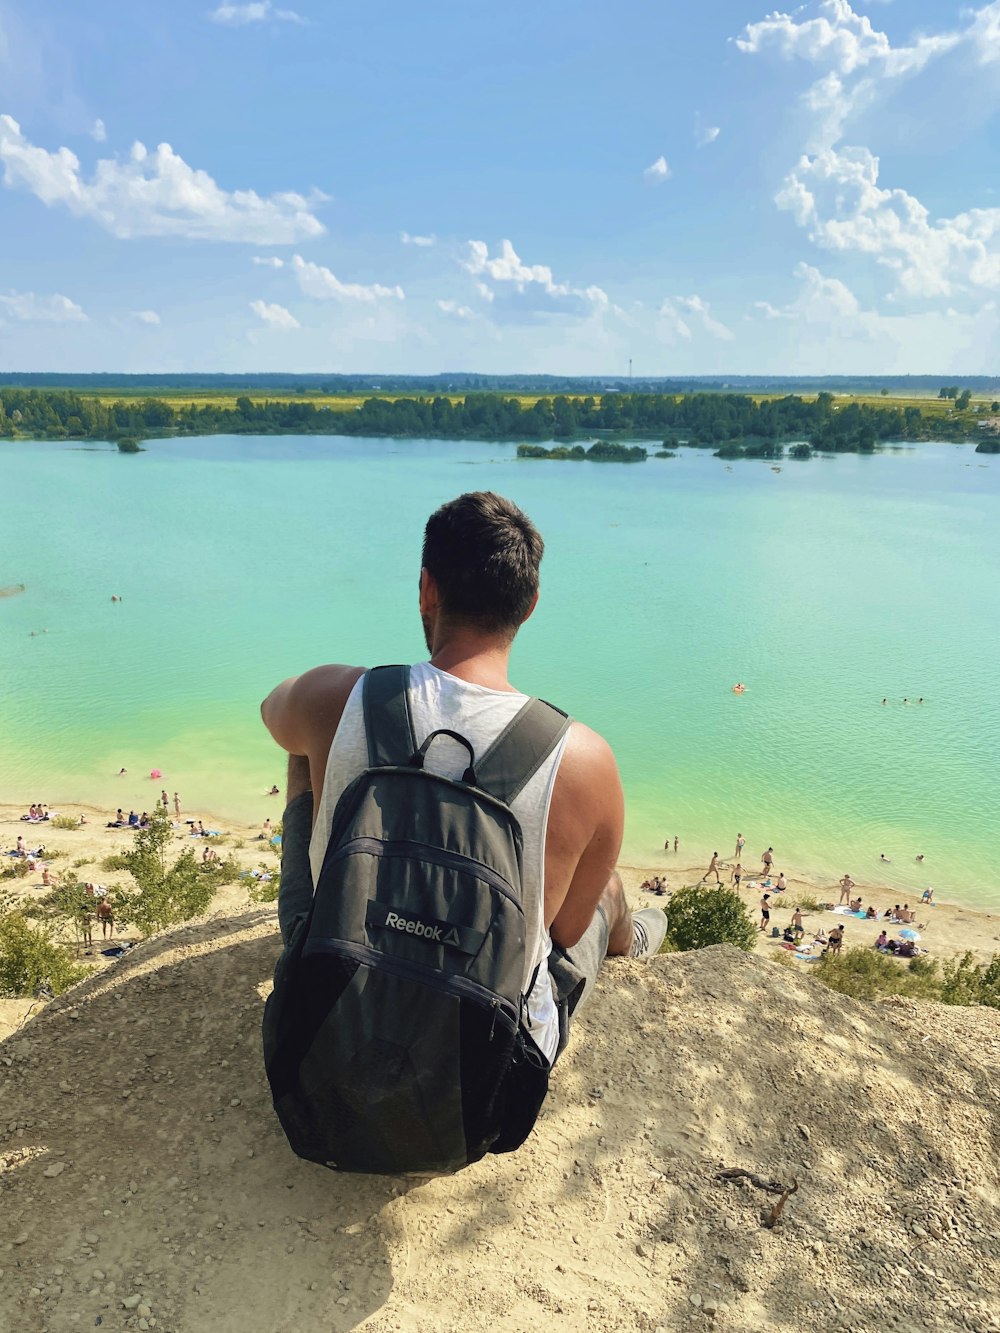 man in black and gray tank top sitting on rock looking at body of water during